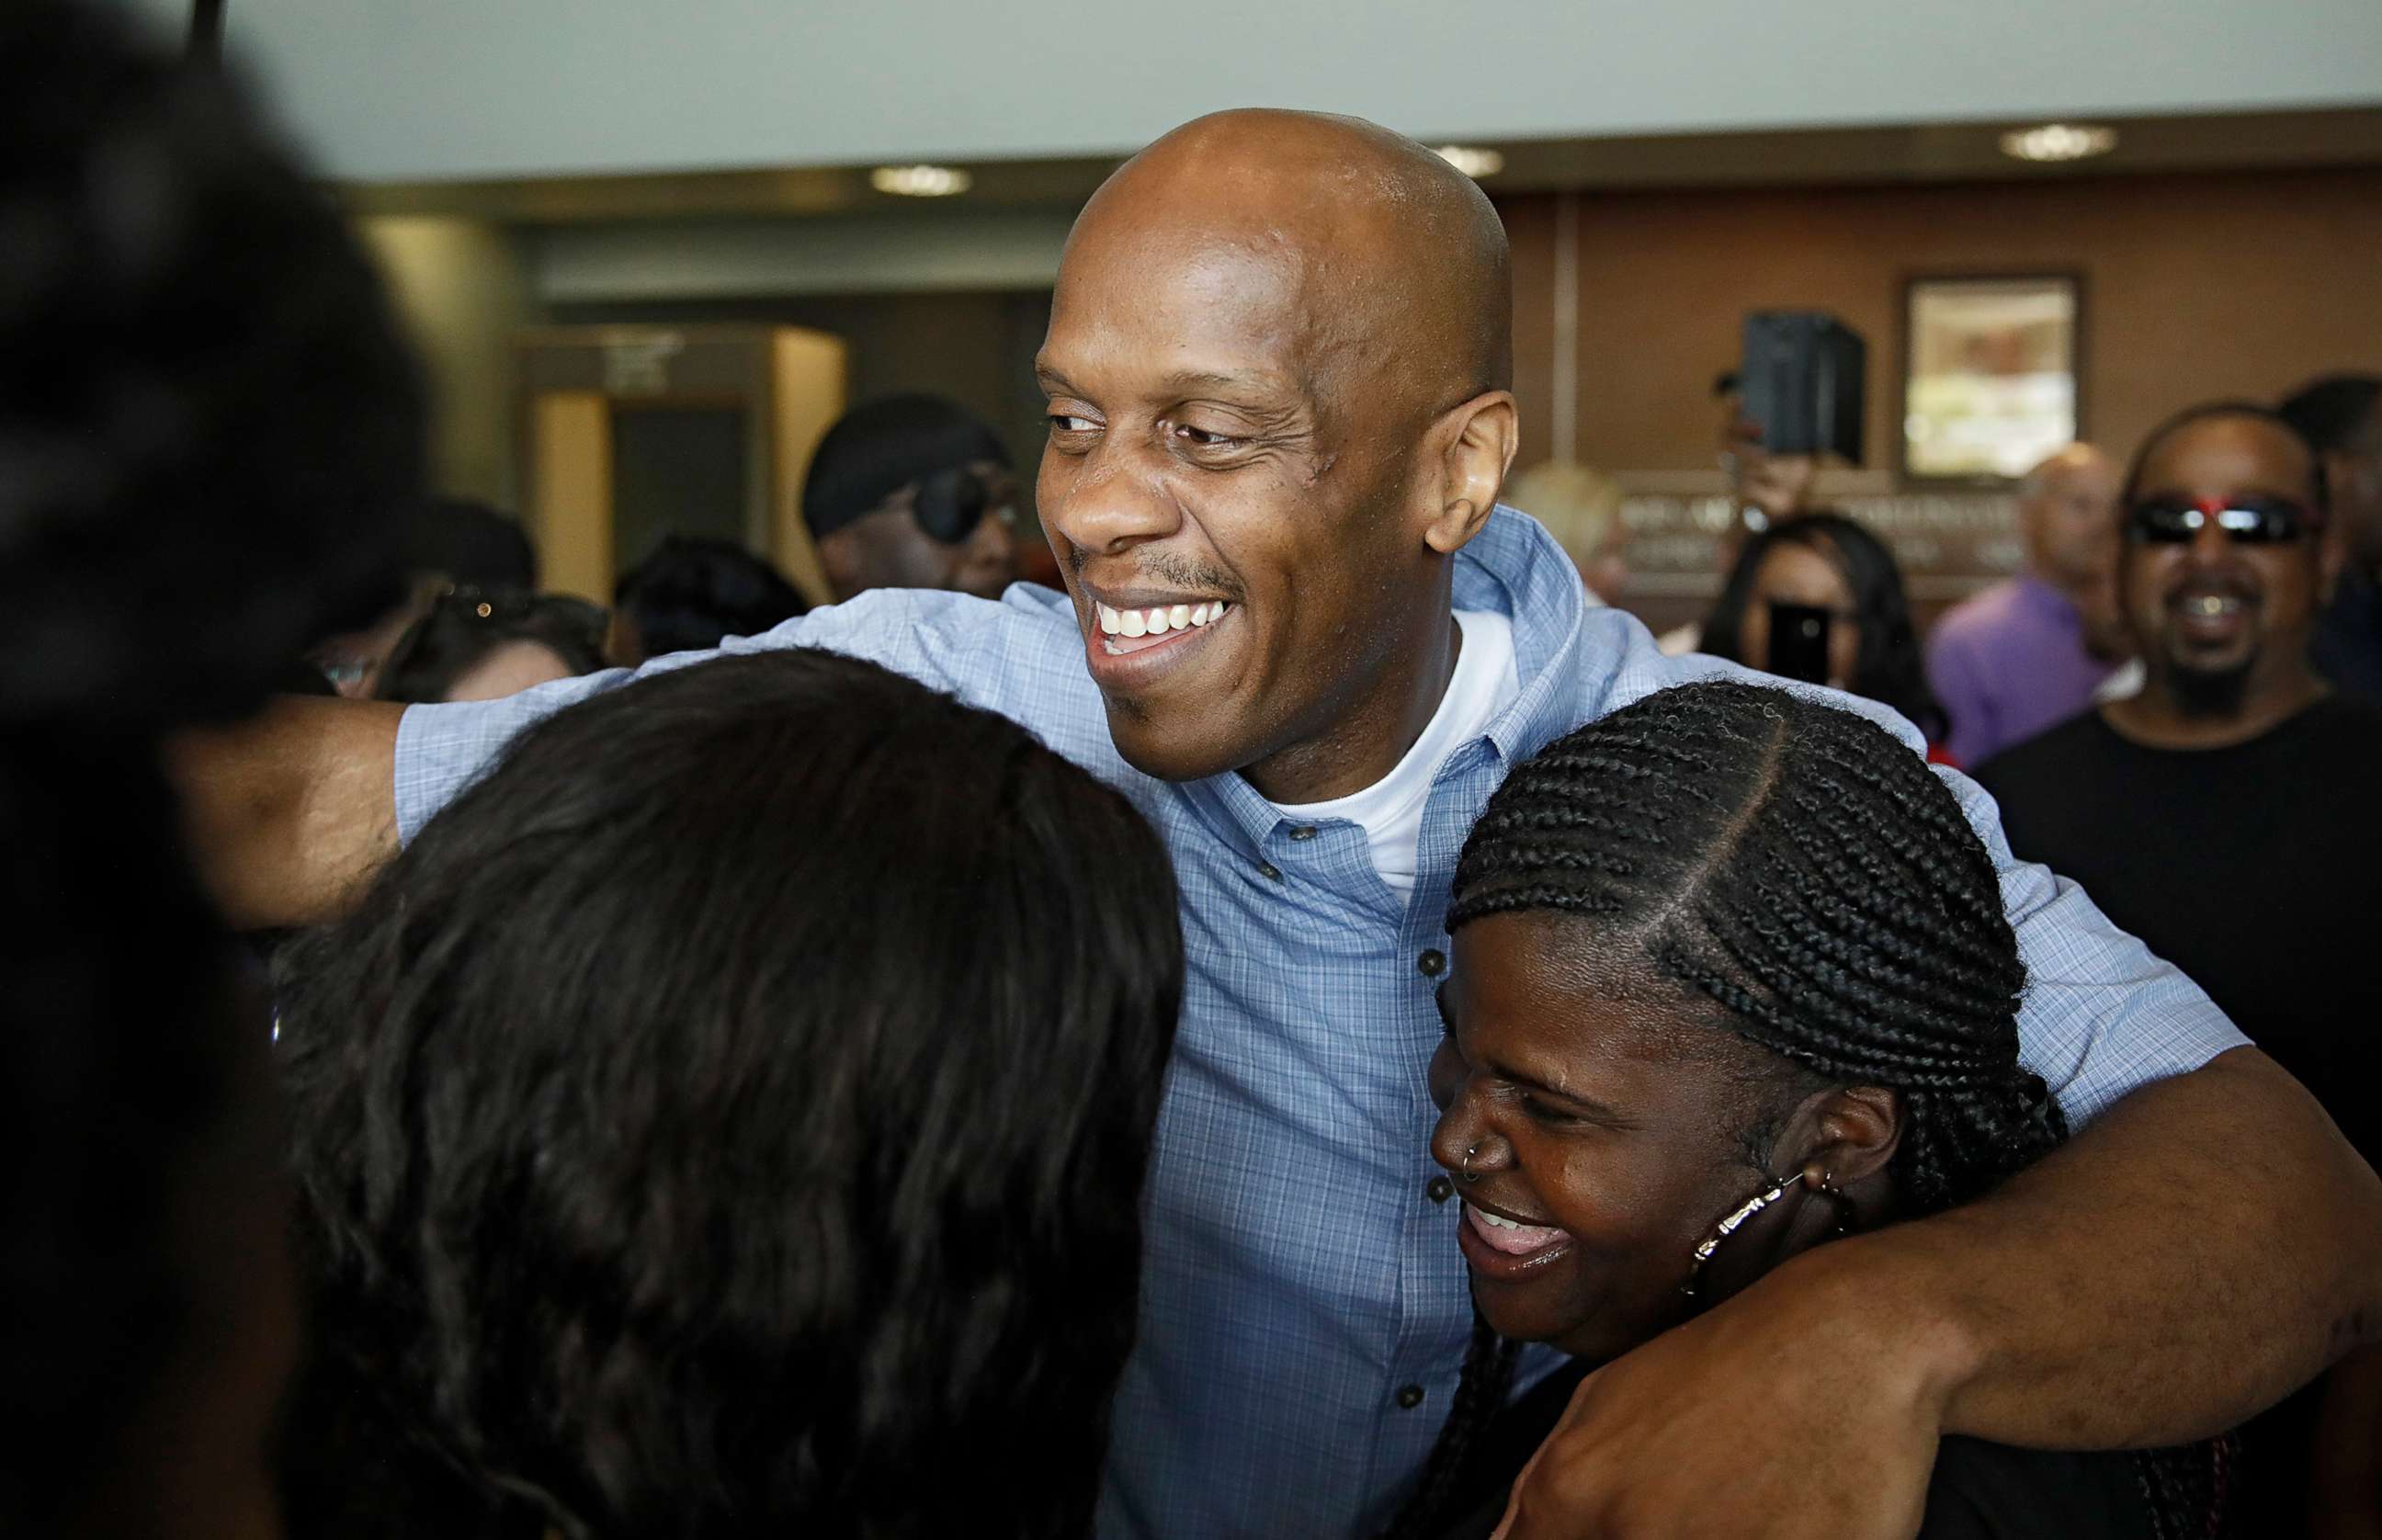 PHOTO: Corey Atchison is greeted by his sisters including Laura Scott, right, as he is freed from the David L. Moss Criminal Justice Center after Judge Sharon Holmes declared him innocent in a 1991 murder case, in Tulsa, Okla., July 16, 2019.